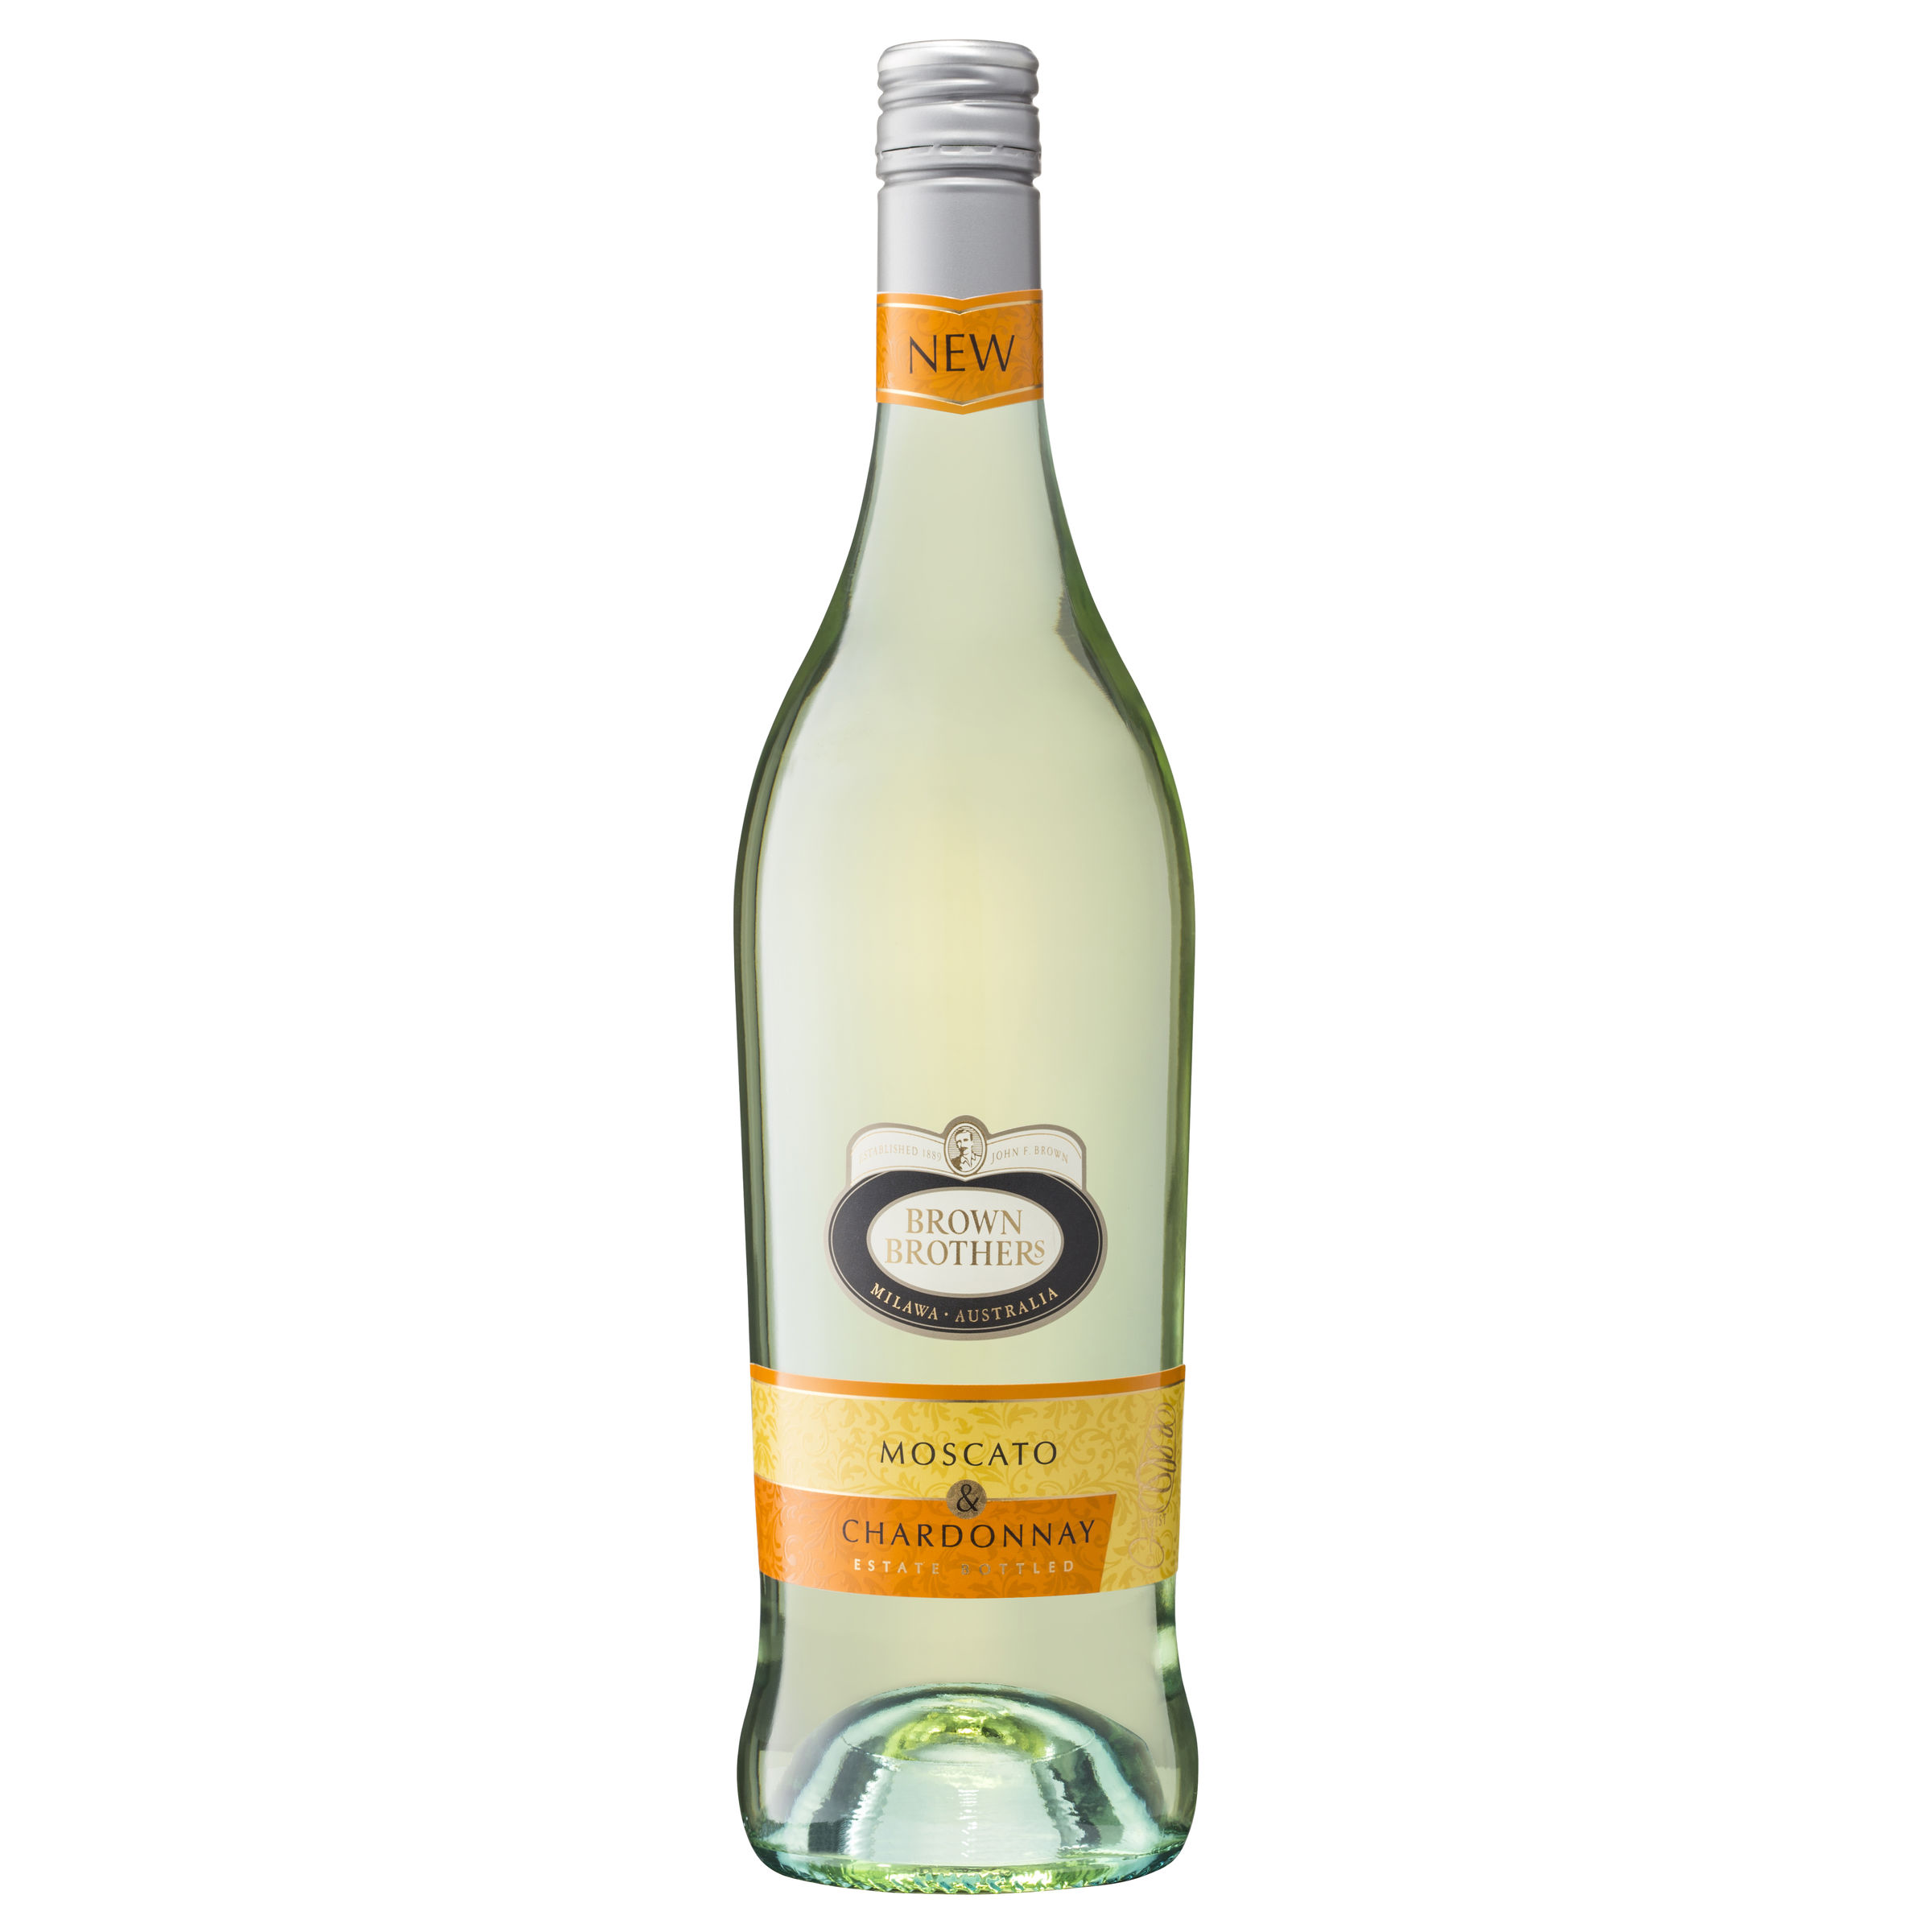 BROWN BROTHERS MOSCATO CHARDONNAY